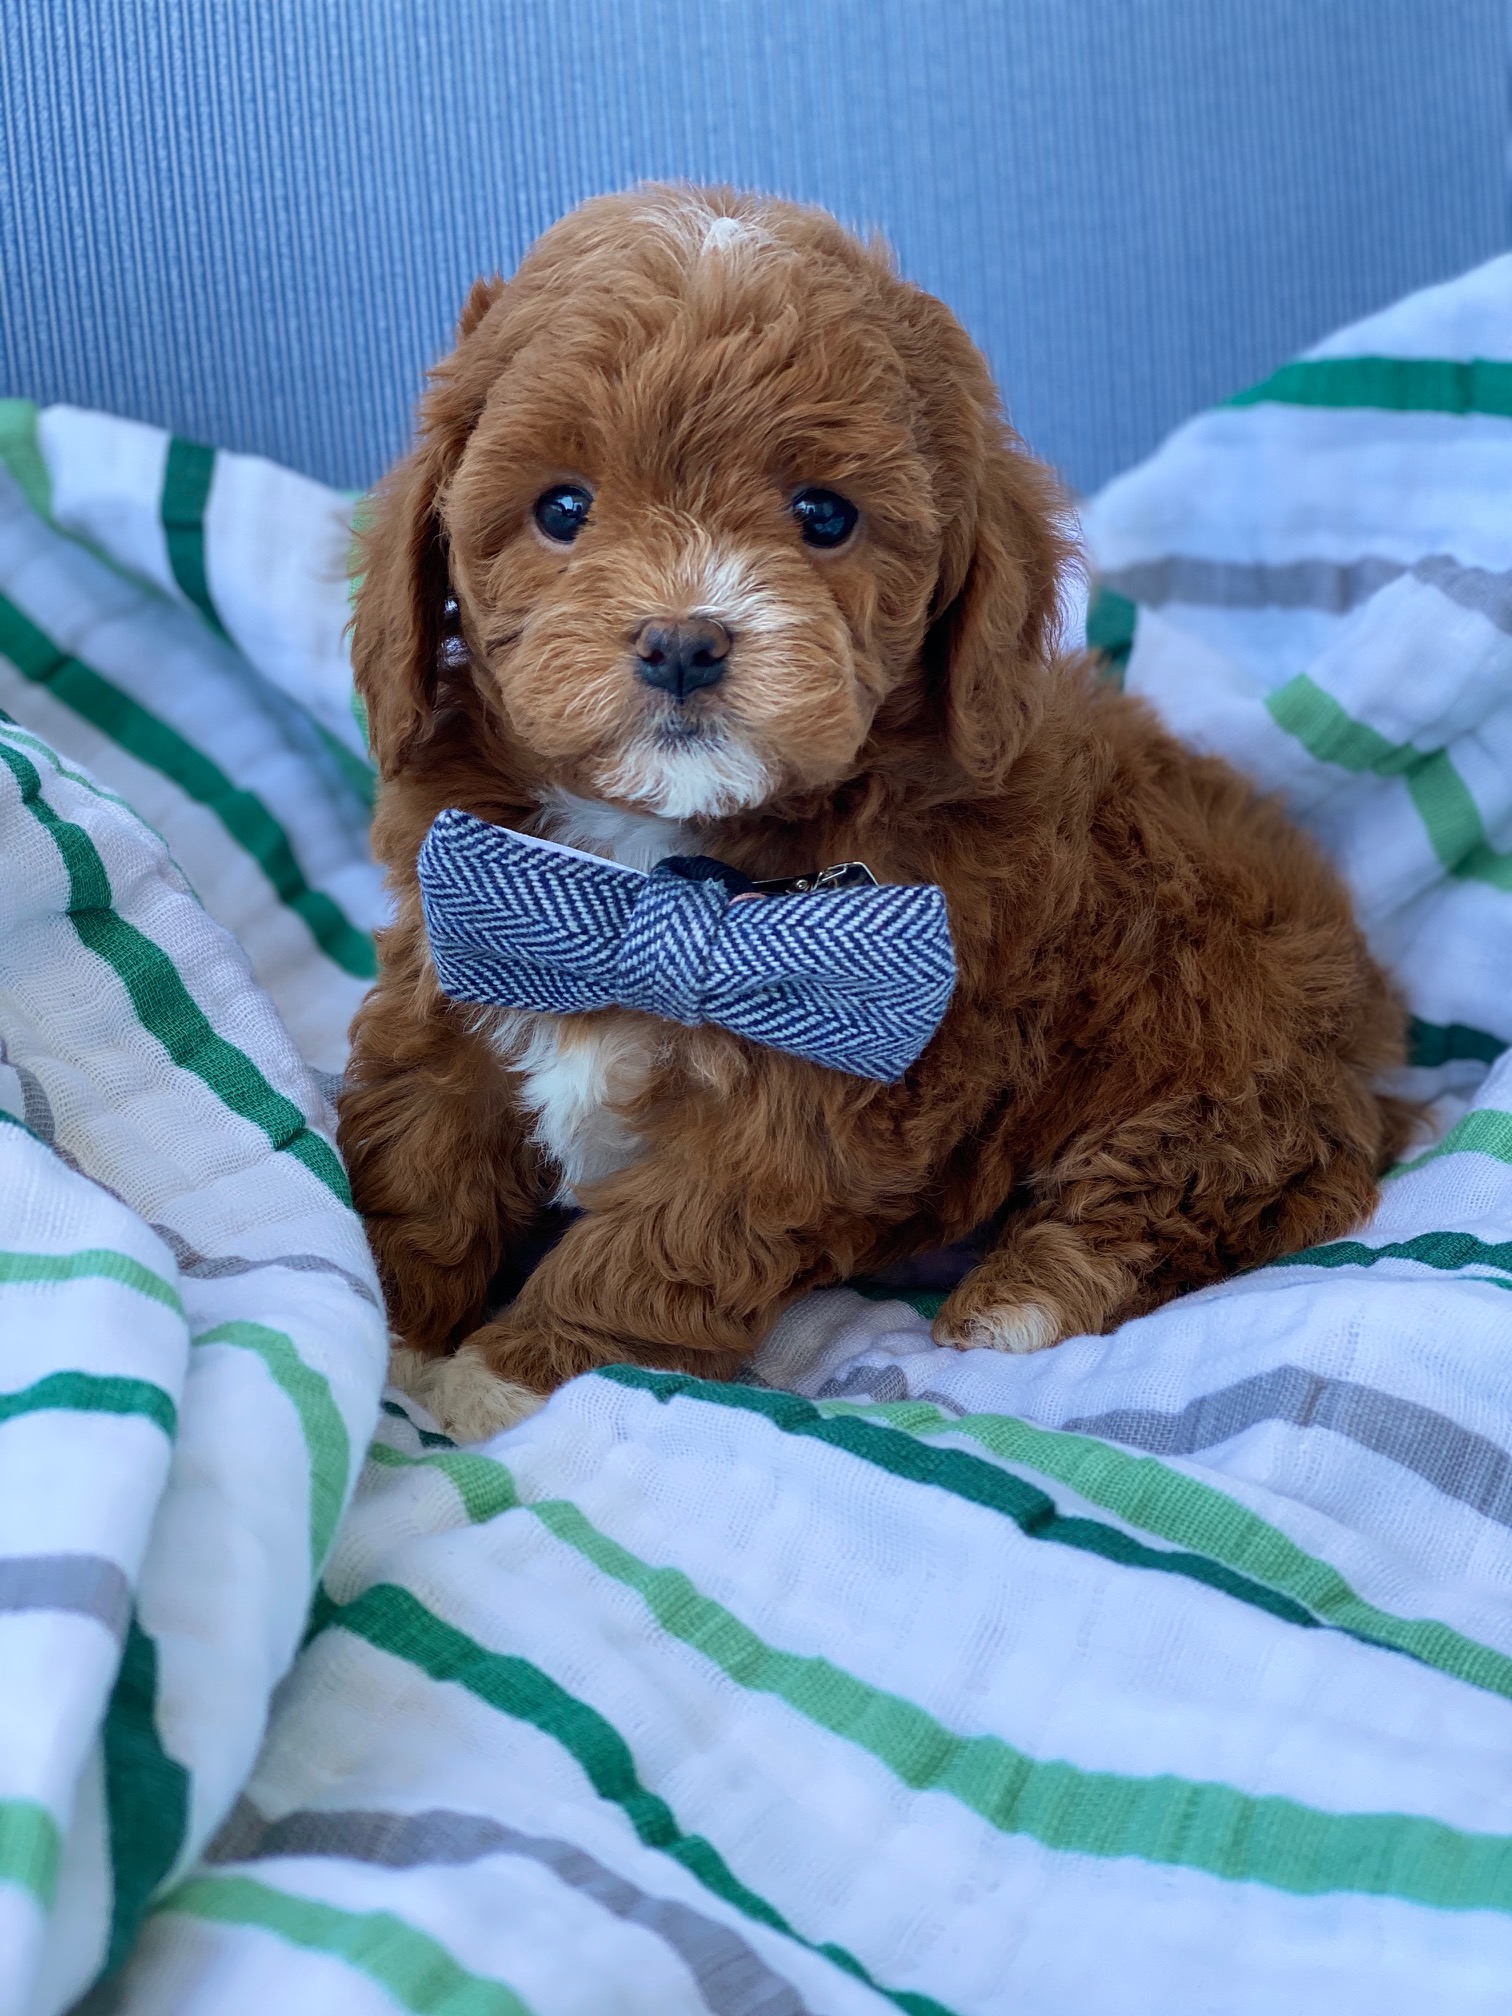 A tiny brown puppy with a charming bow tie is sitting on a bed, looking adorable.